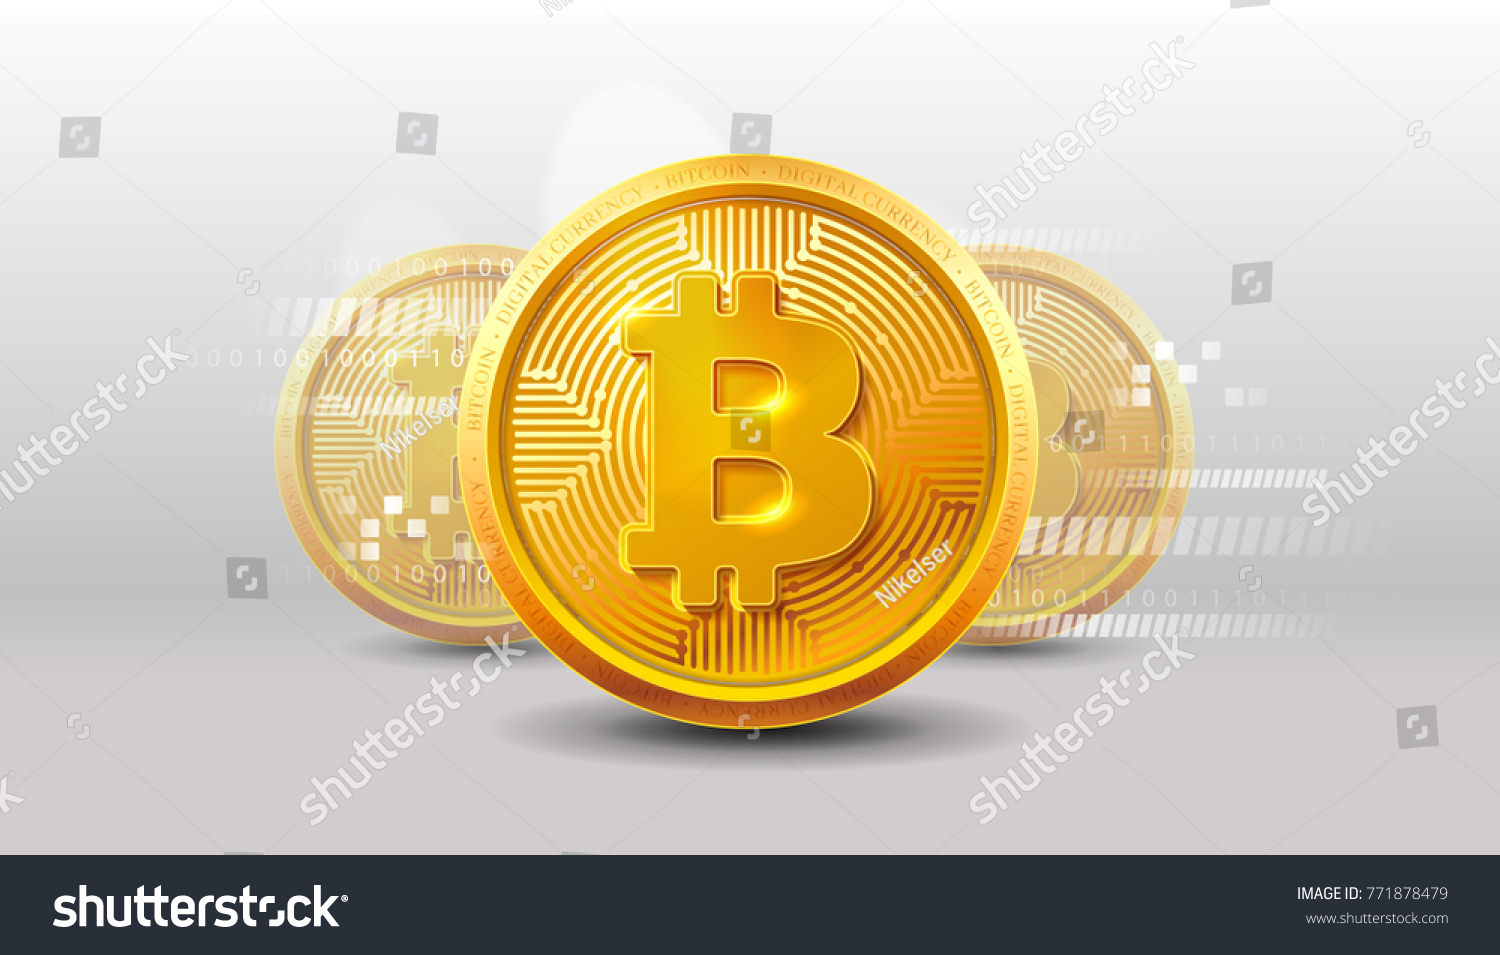 SVG of Bitcoins money Virtual currency concept background. Golden bitcoin coin blockchain technology for crypto currency. Digital money currency. Vector stock illustration. EPS 10 svg